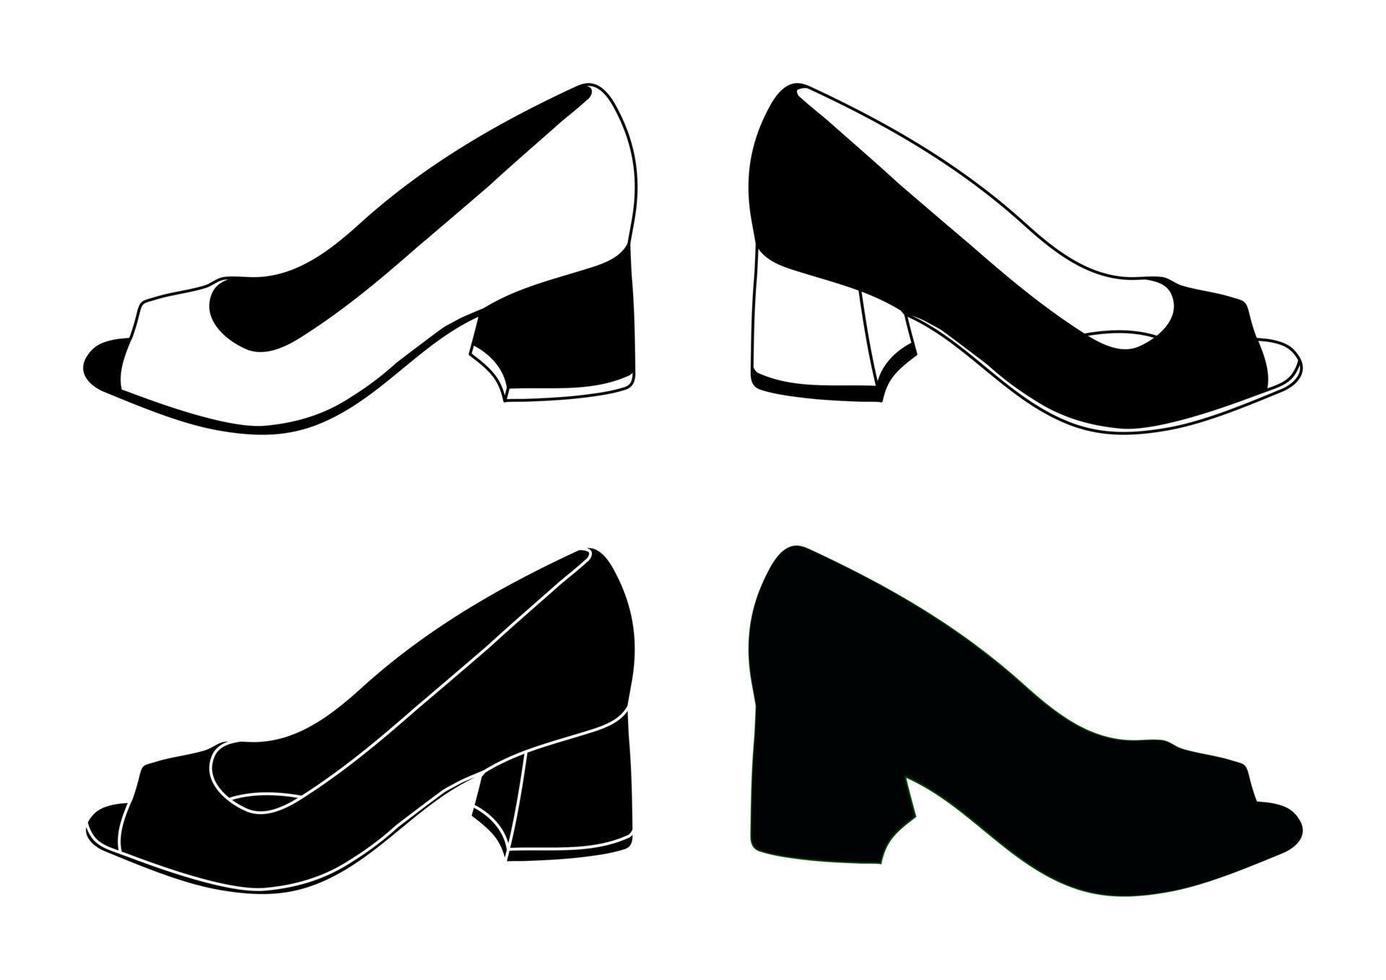 Women's high heel shoes, female shoe model, silhouette on white background isolated vector